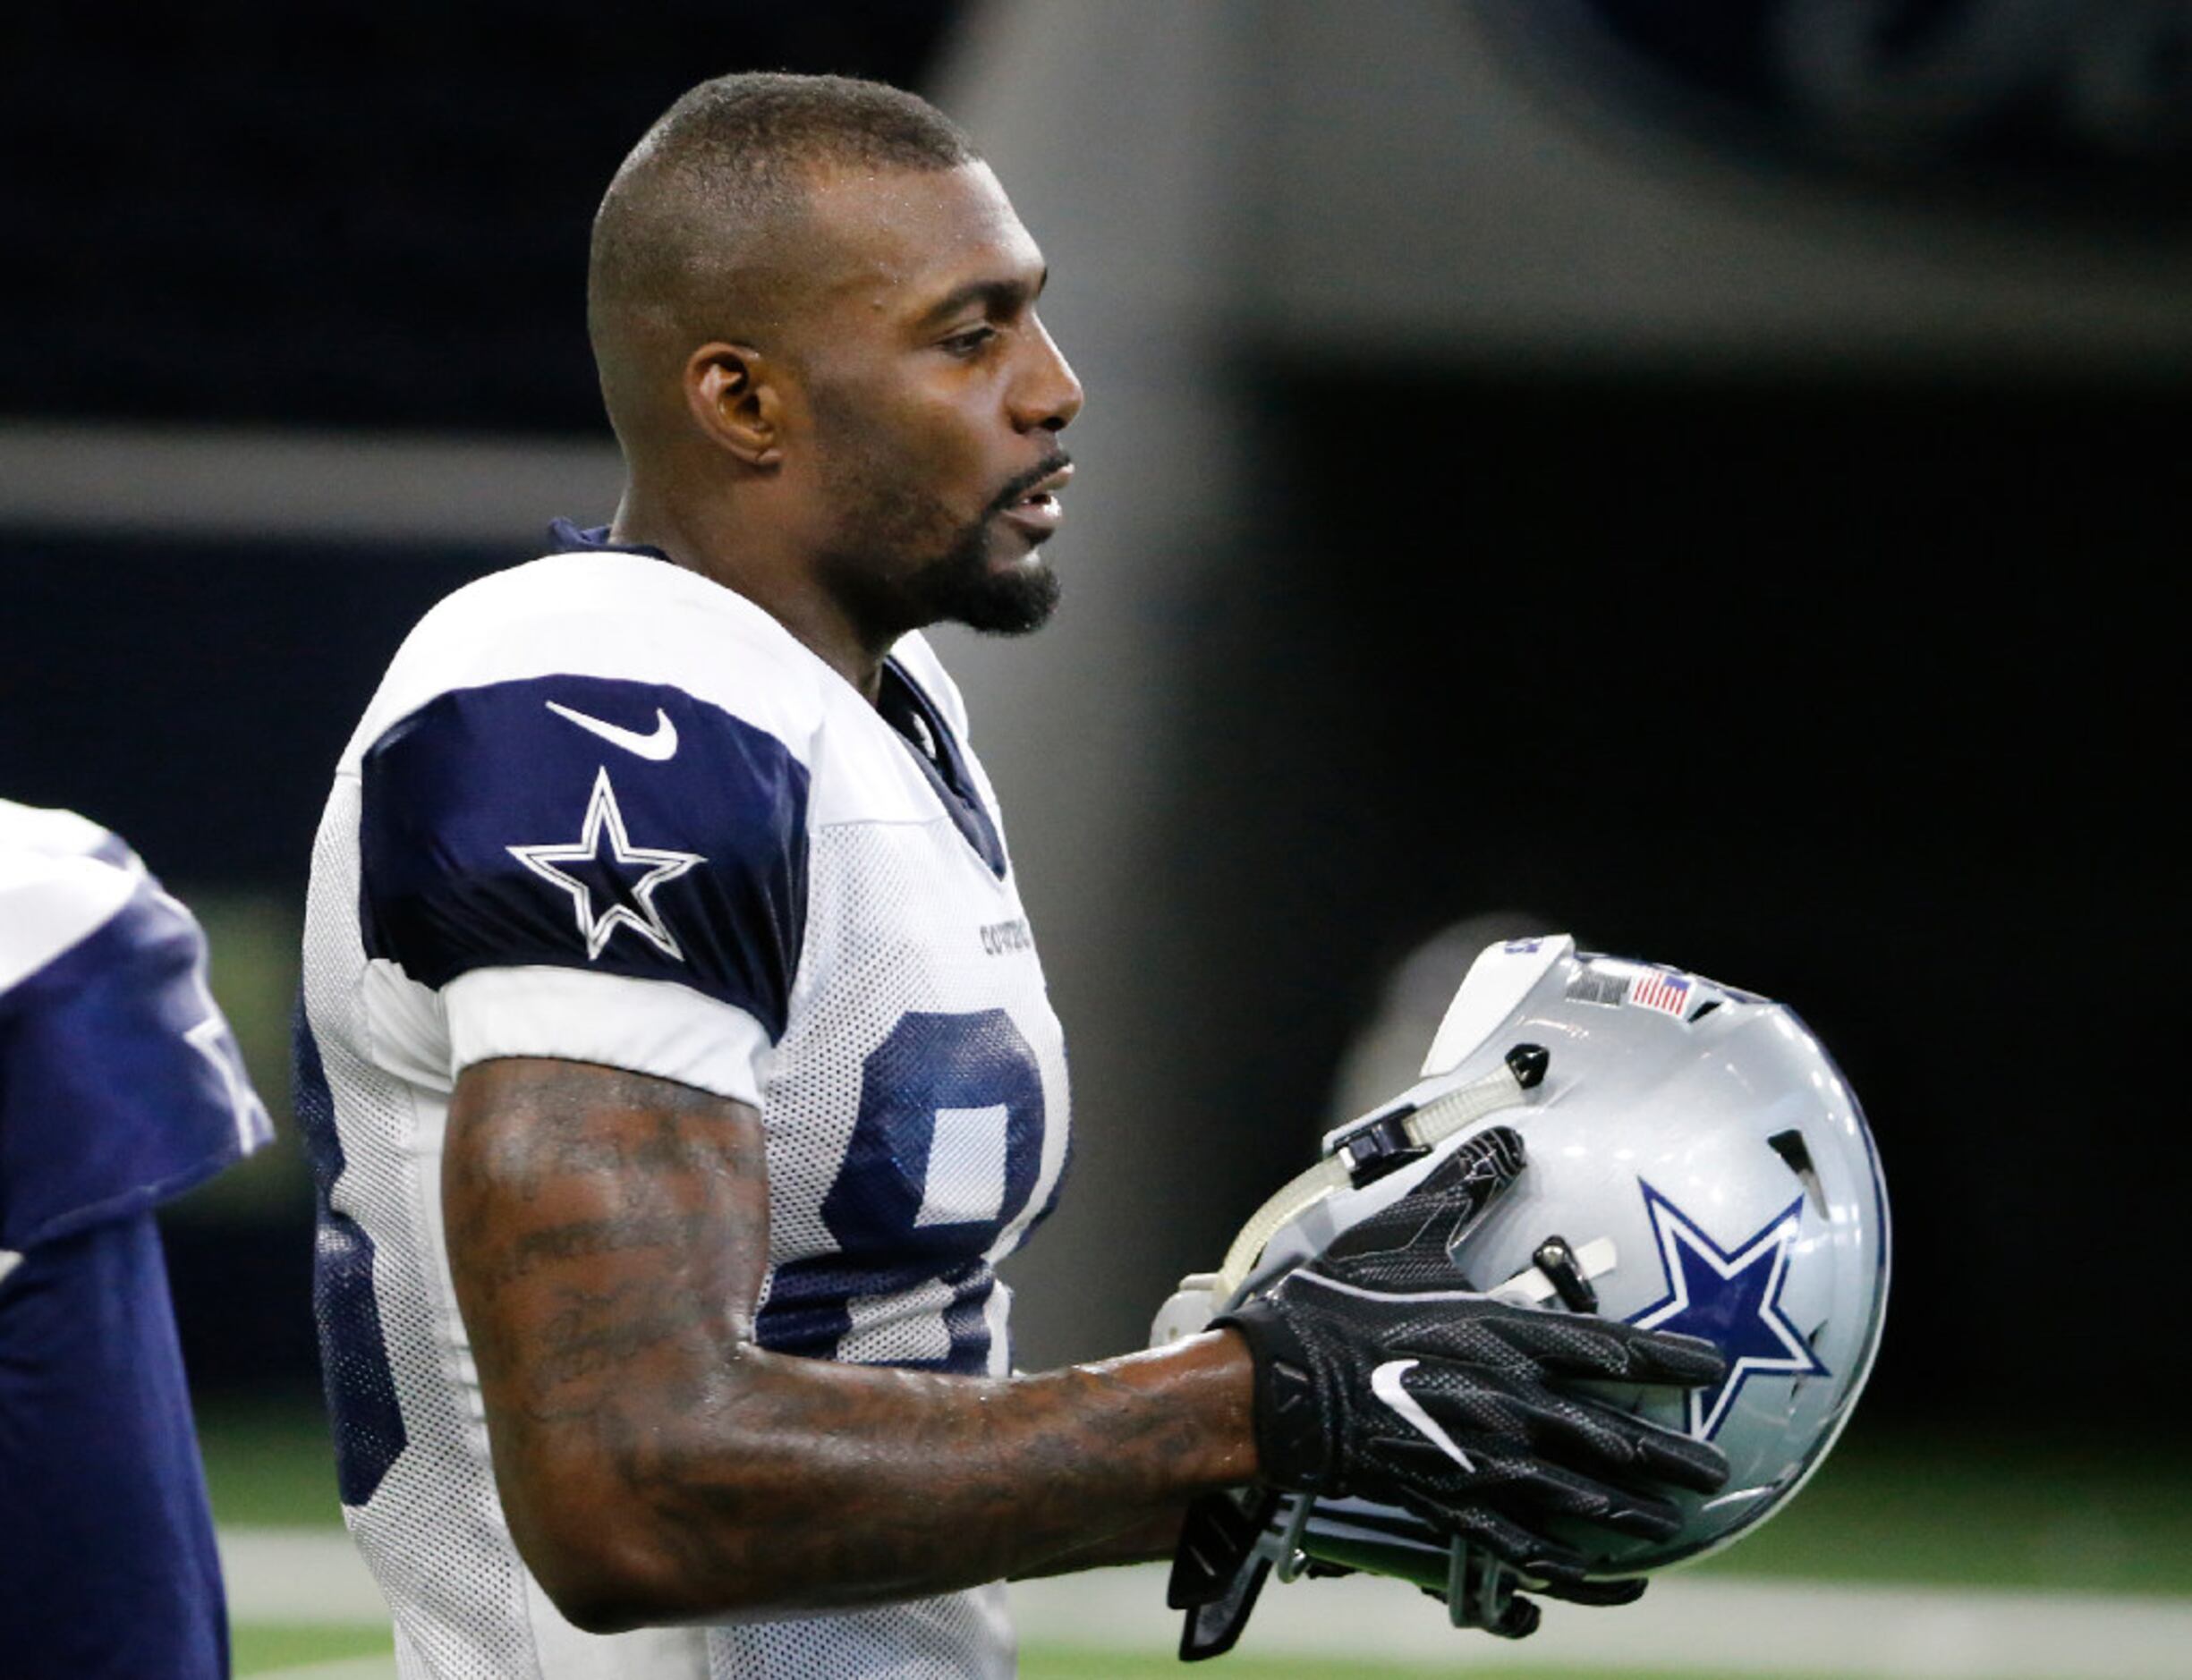 10 things you might not know about Dez Bryant, including his upbringing and  the infamous combine question